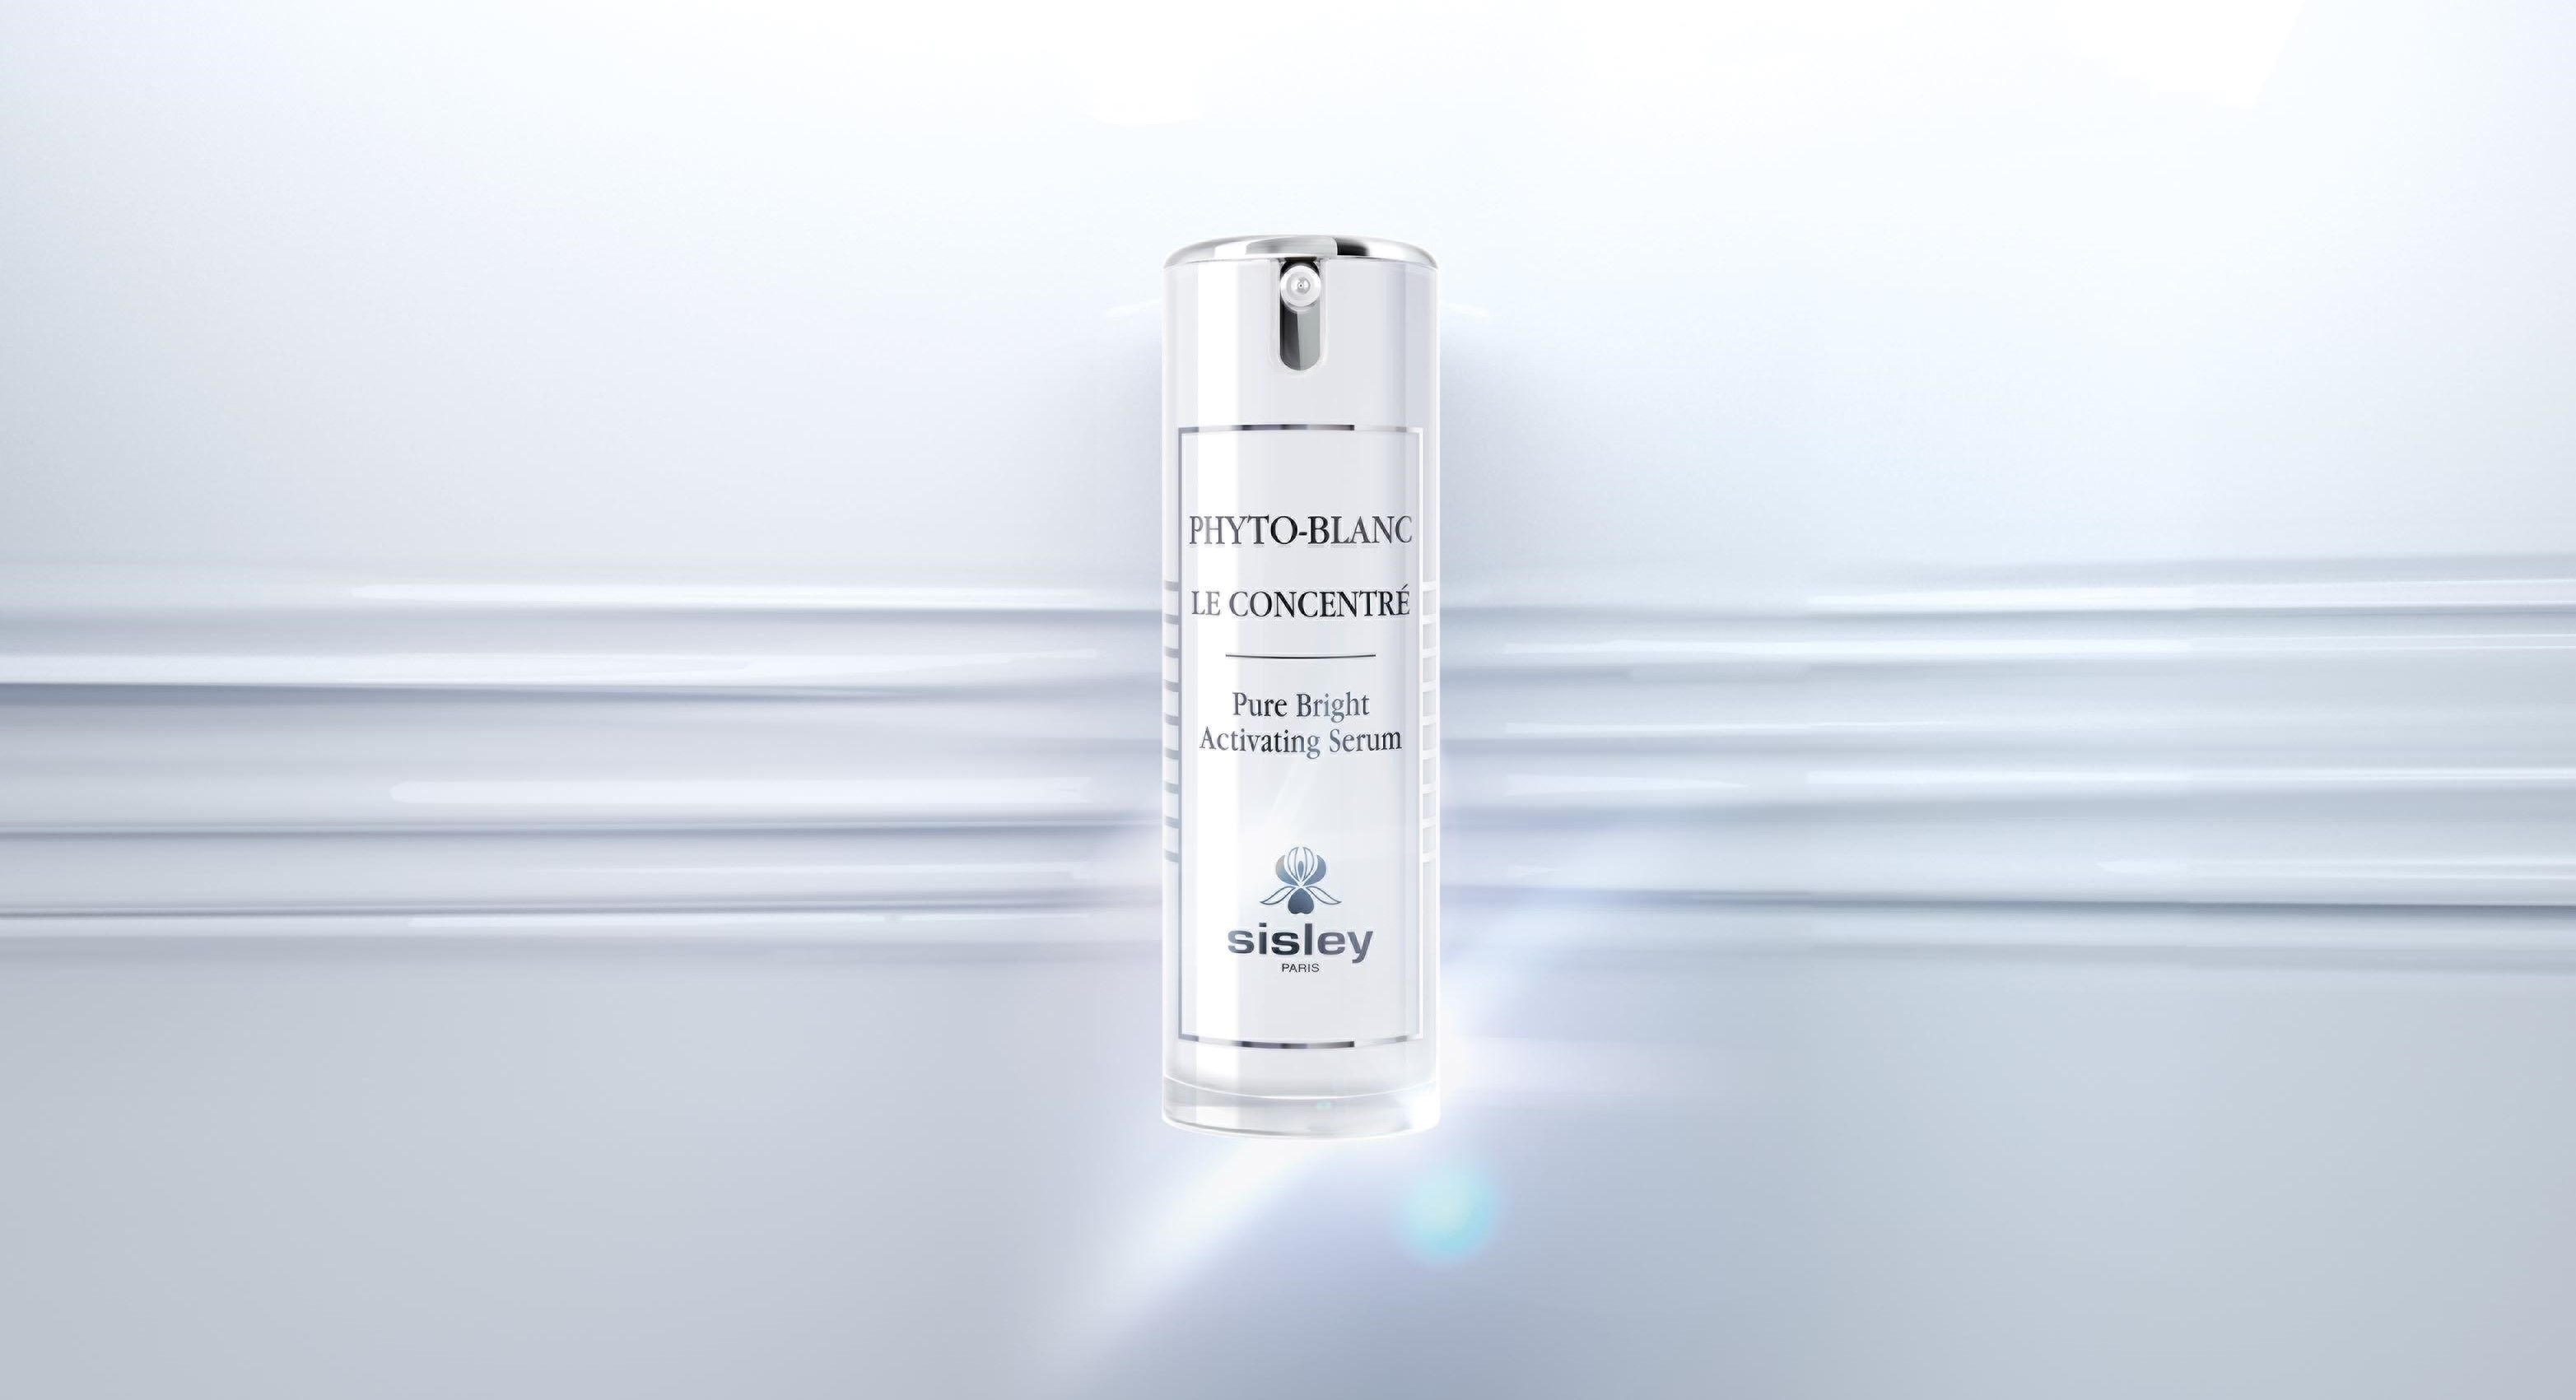 The Bright Side: Introducing Sisley’s Phyto-Blanc Le Concentré